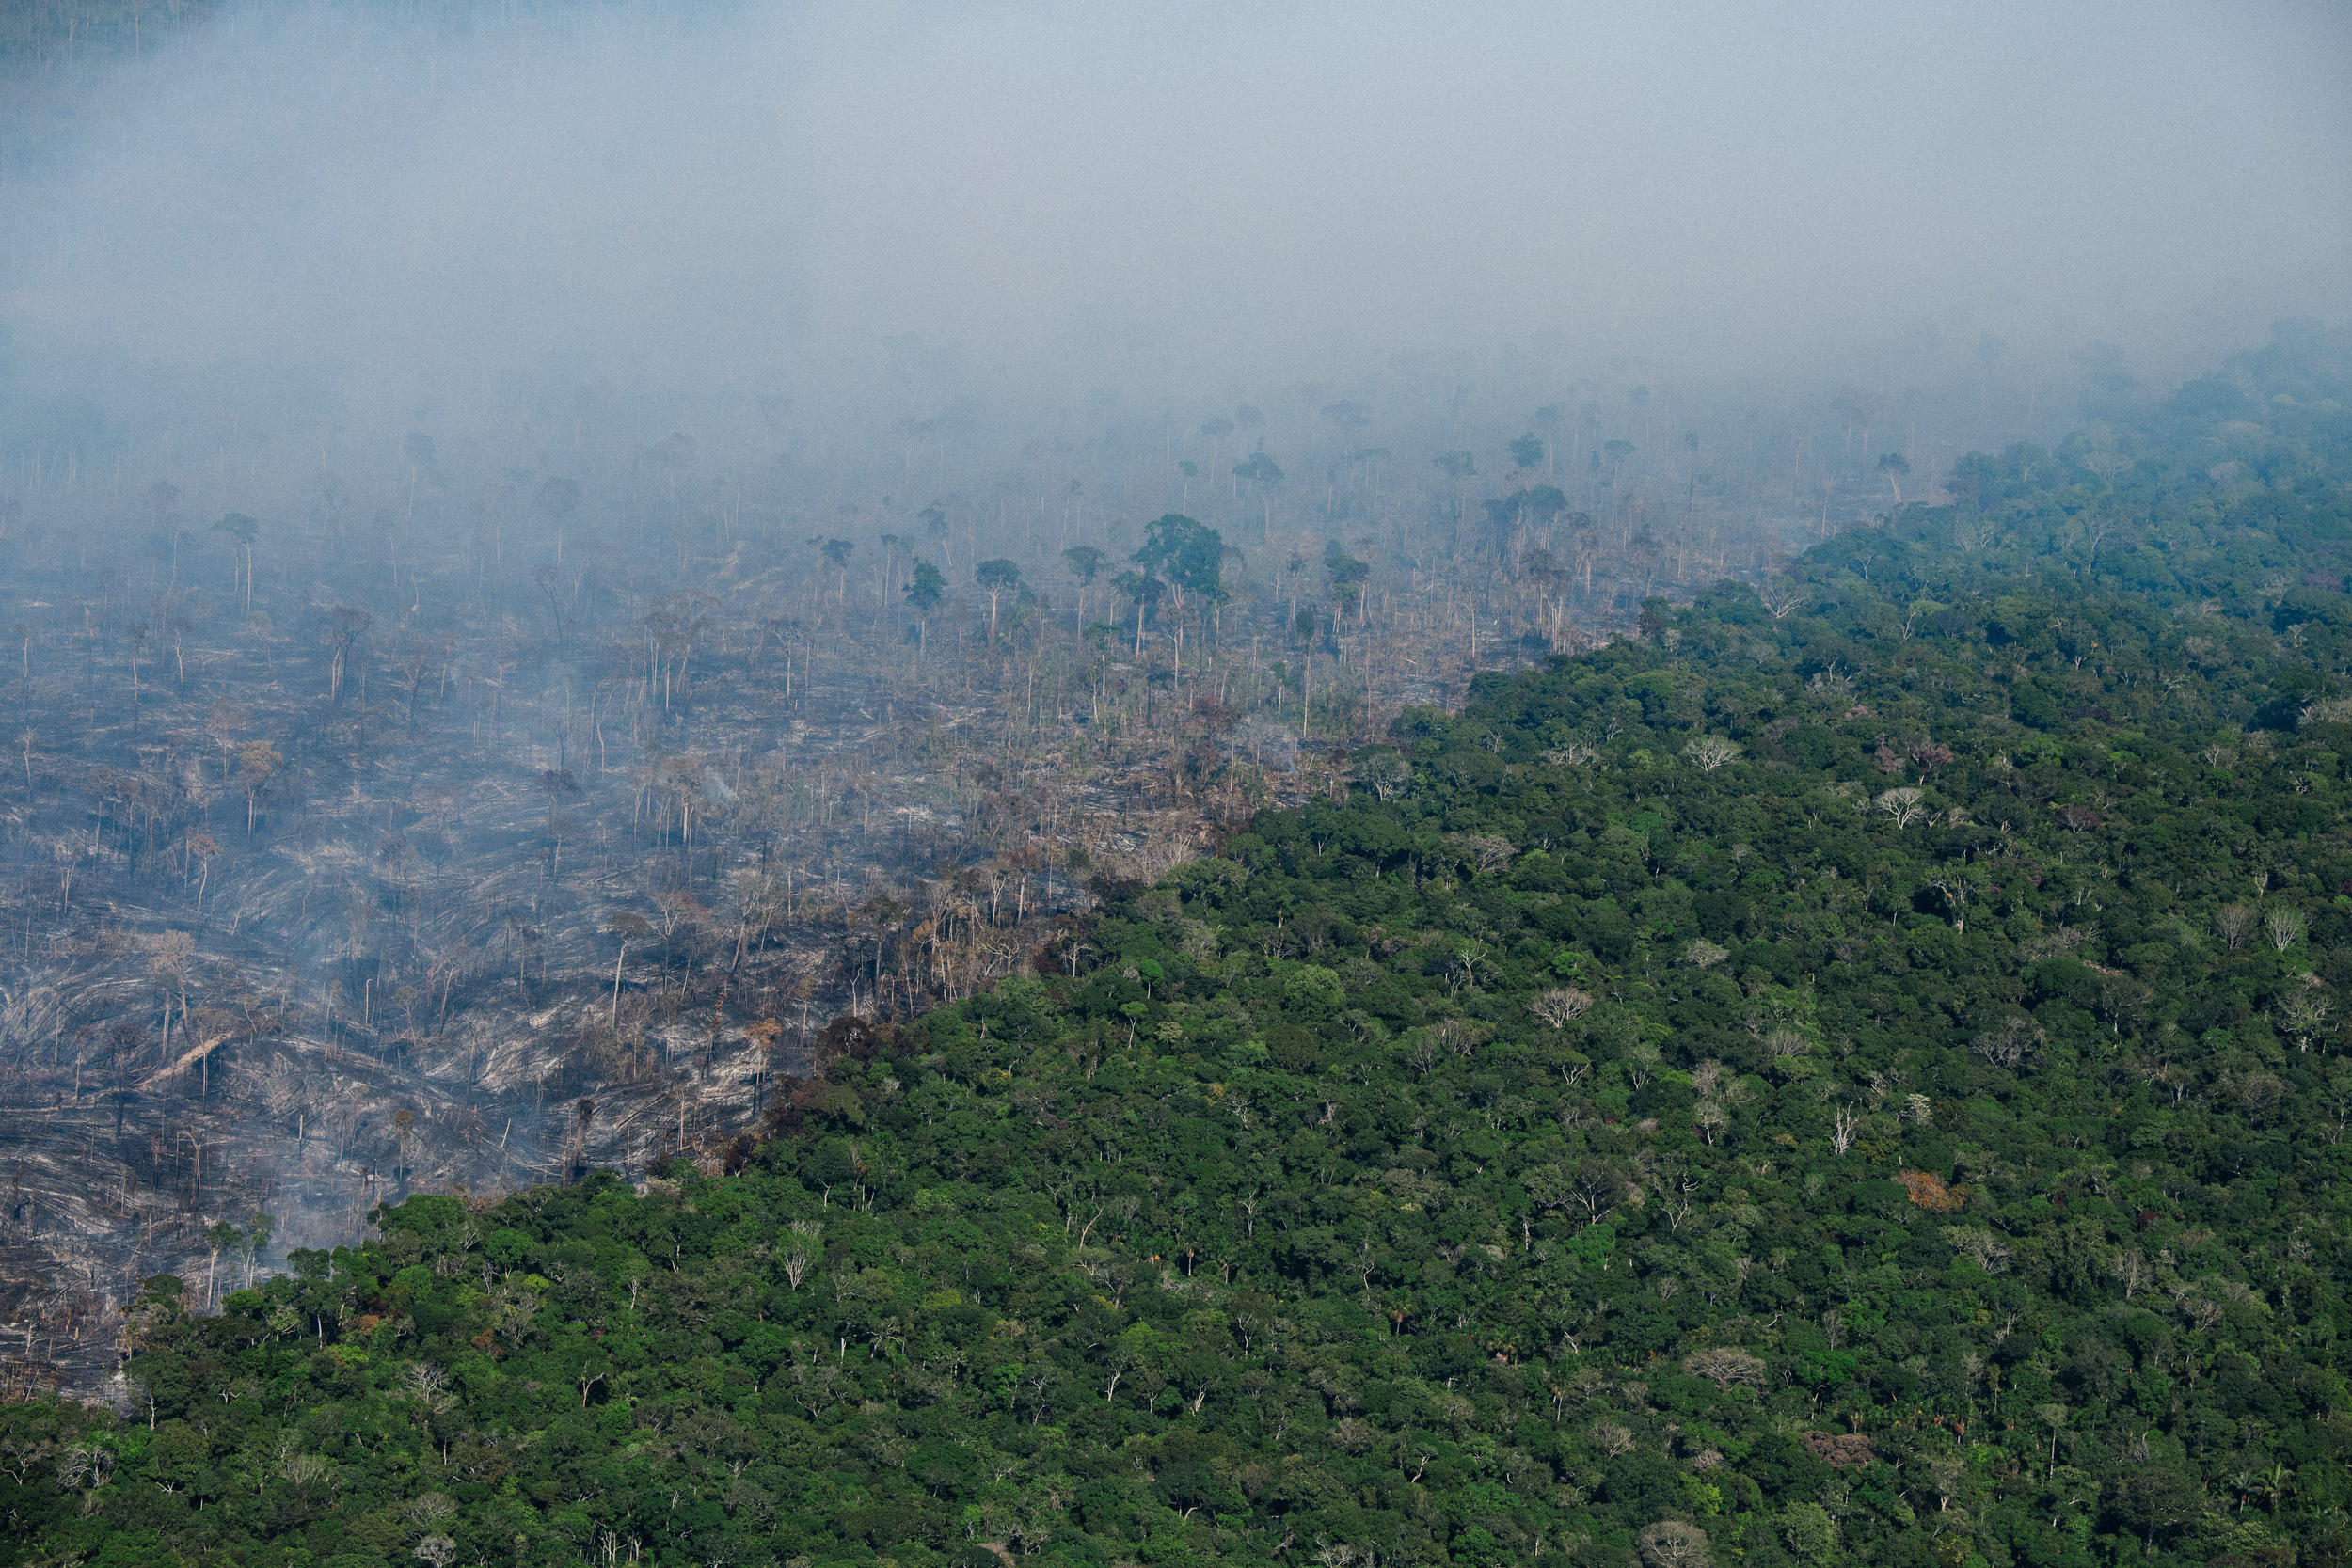 Novo Aripuanã, Amazonas state. Greenpeace Brazil flew over the southern Amazonas and northern Rondônia states in Brazil to monitor deforestation and forest fires in the Amazon in July 2022. © Christian Braga / Greenpeace